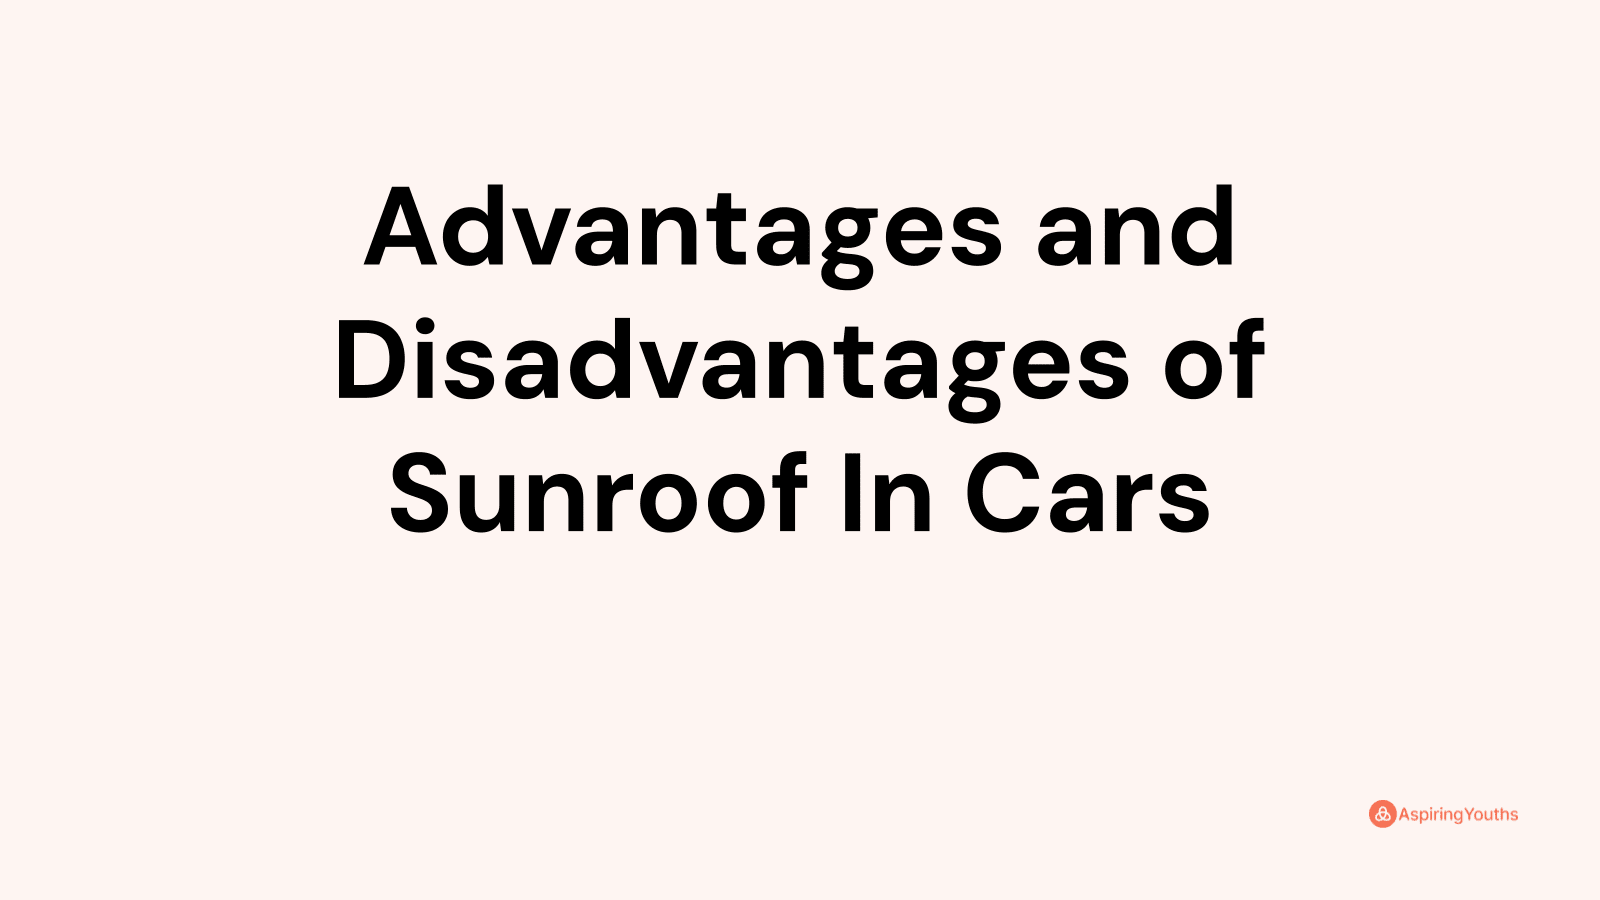 Advantages and disadvantages of Sunroof In Cars